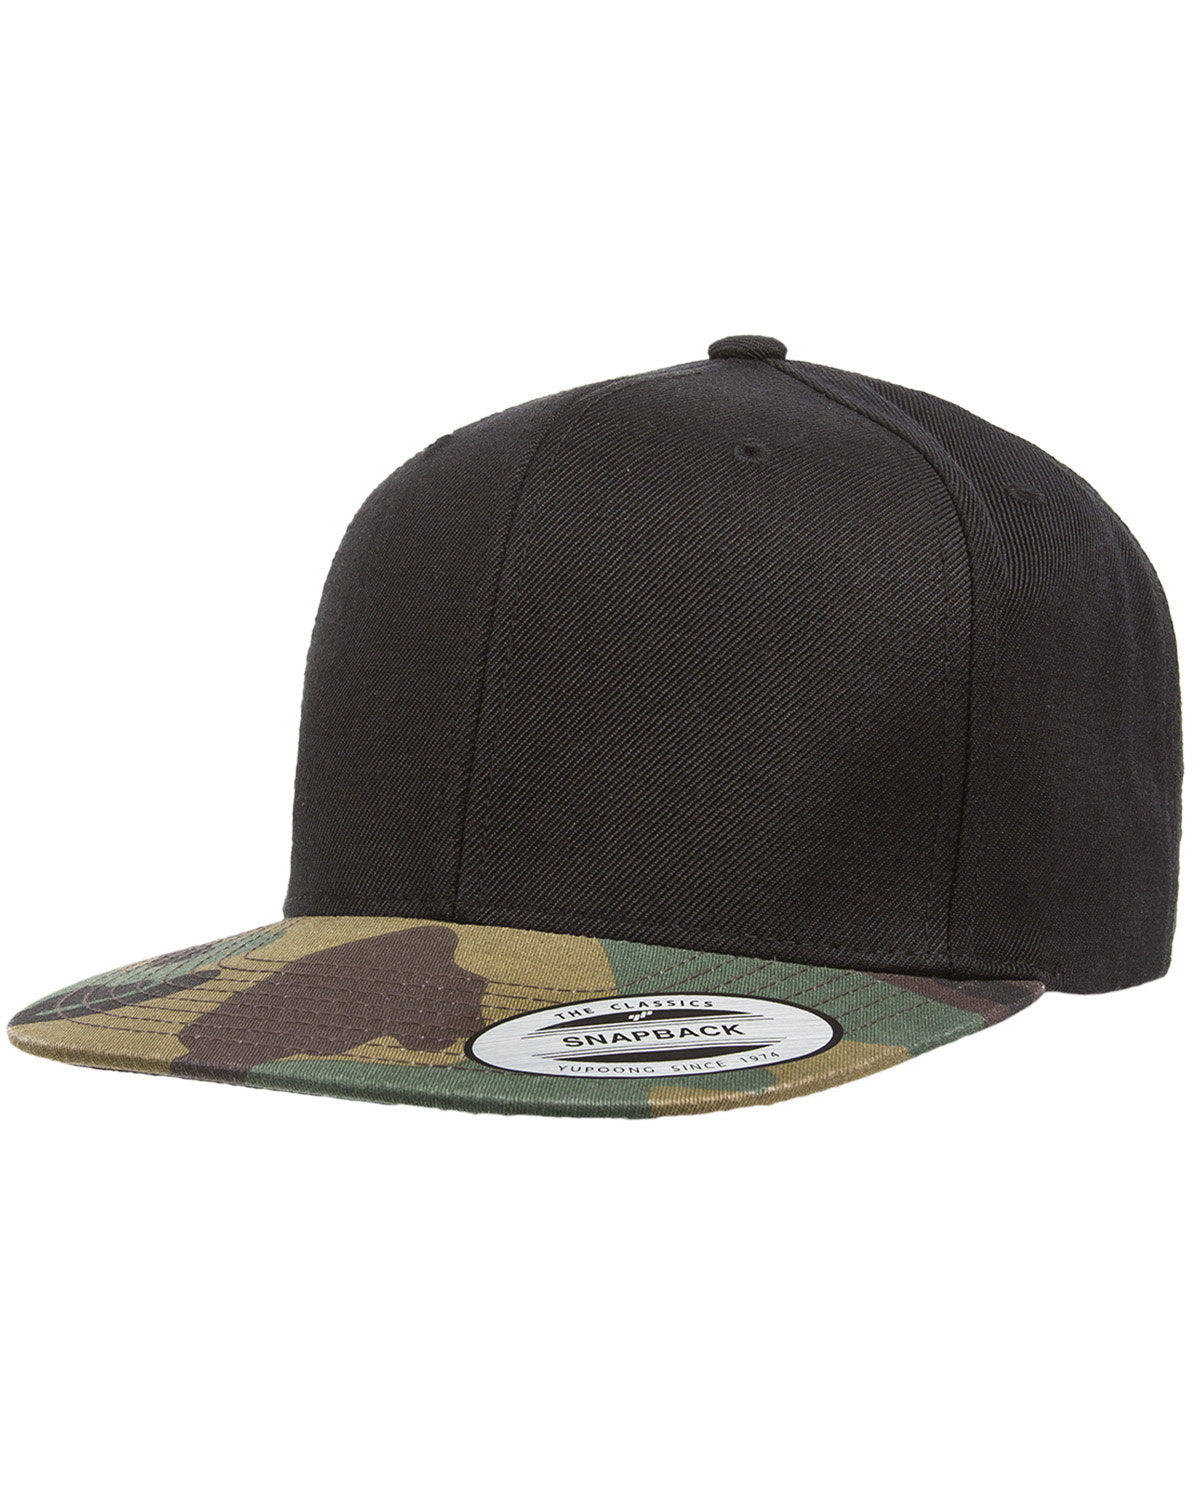 Black hat with camo, tan, brown and black brim. Front view. 